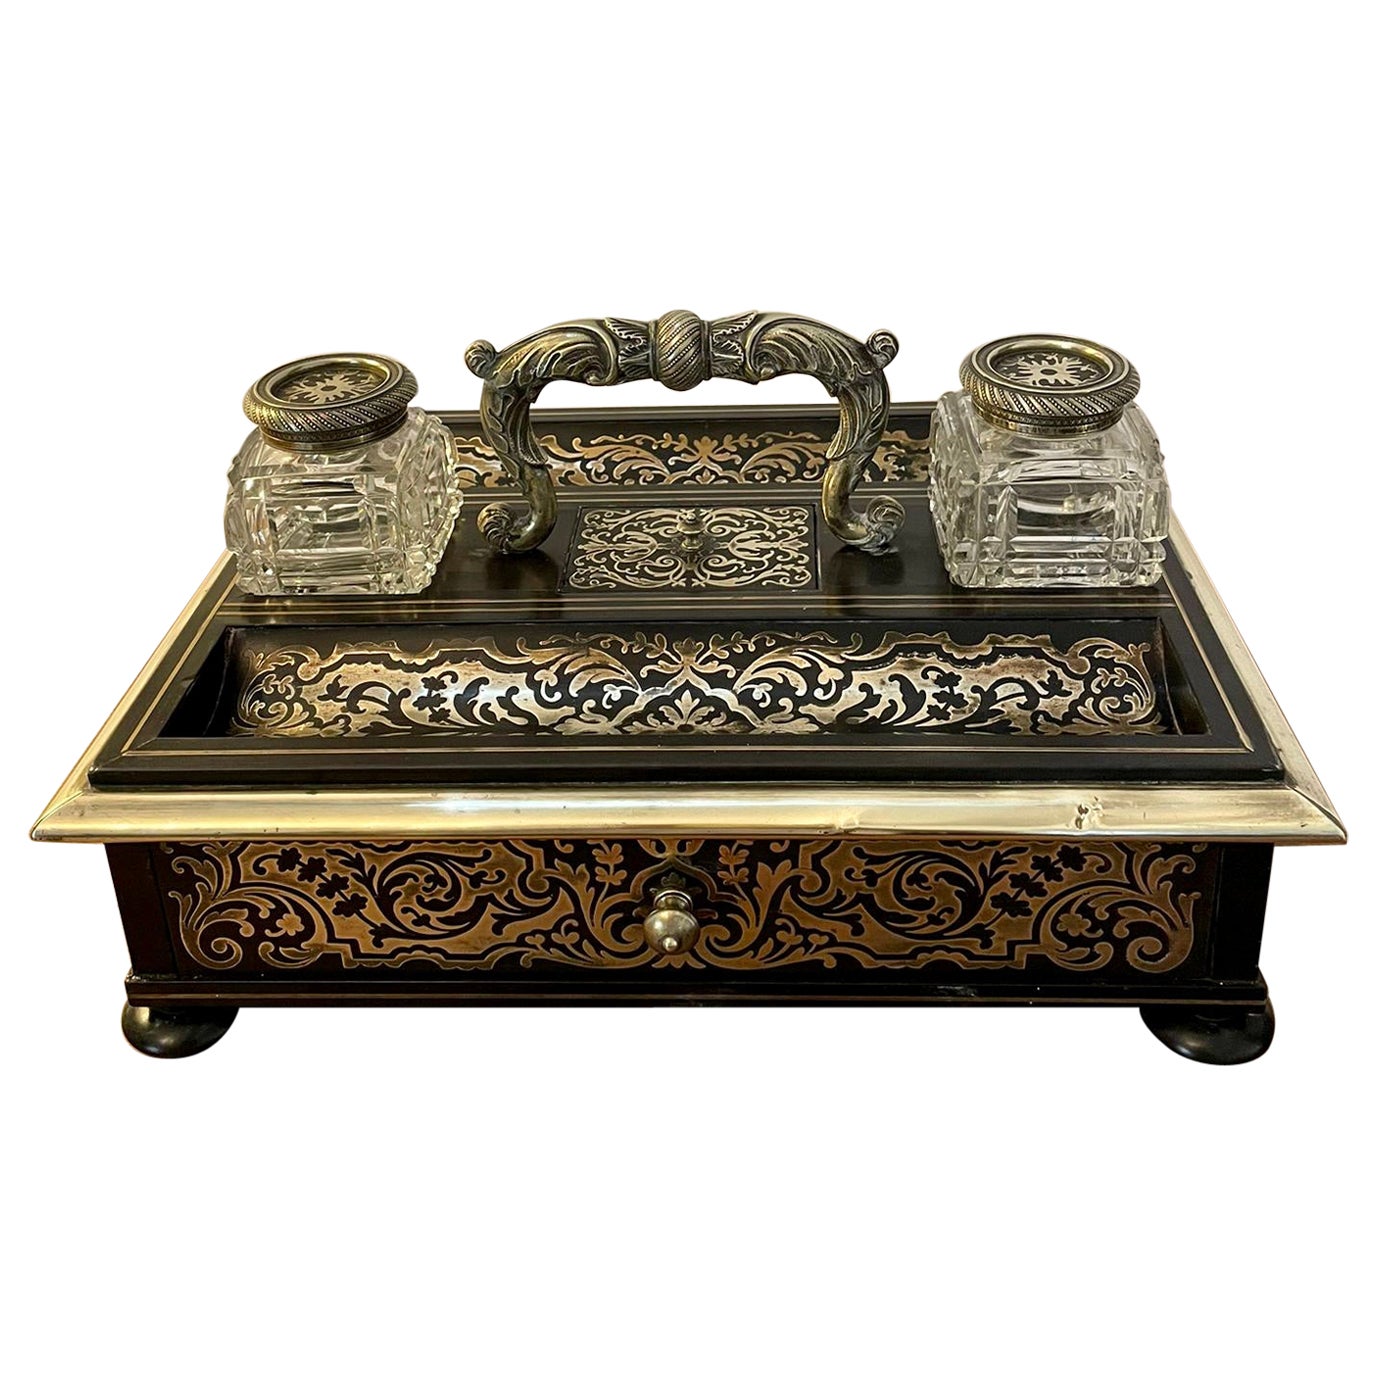 Fine Quality Antique Victorian French Freestanding Inlaid Boulle Desk Set For Sale